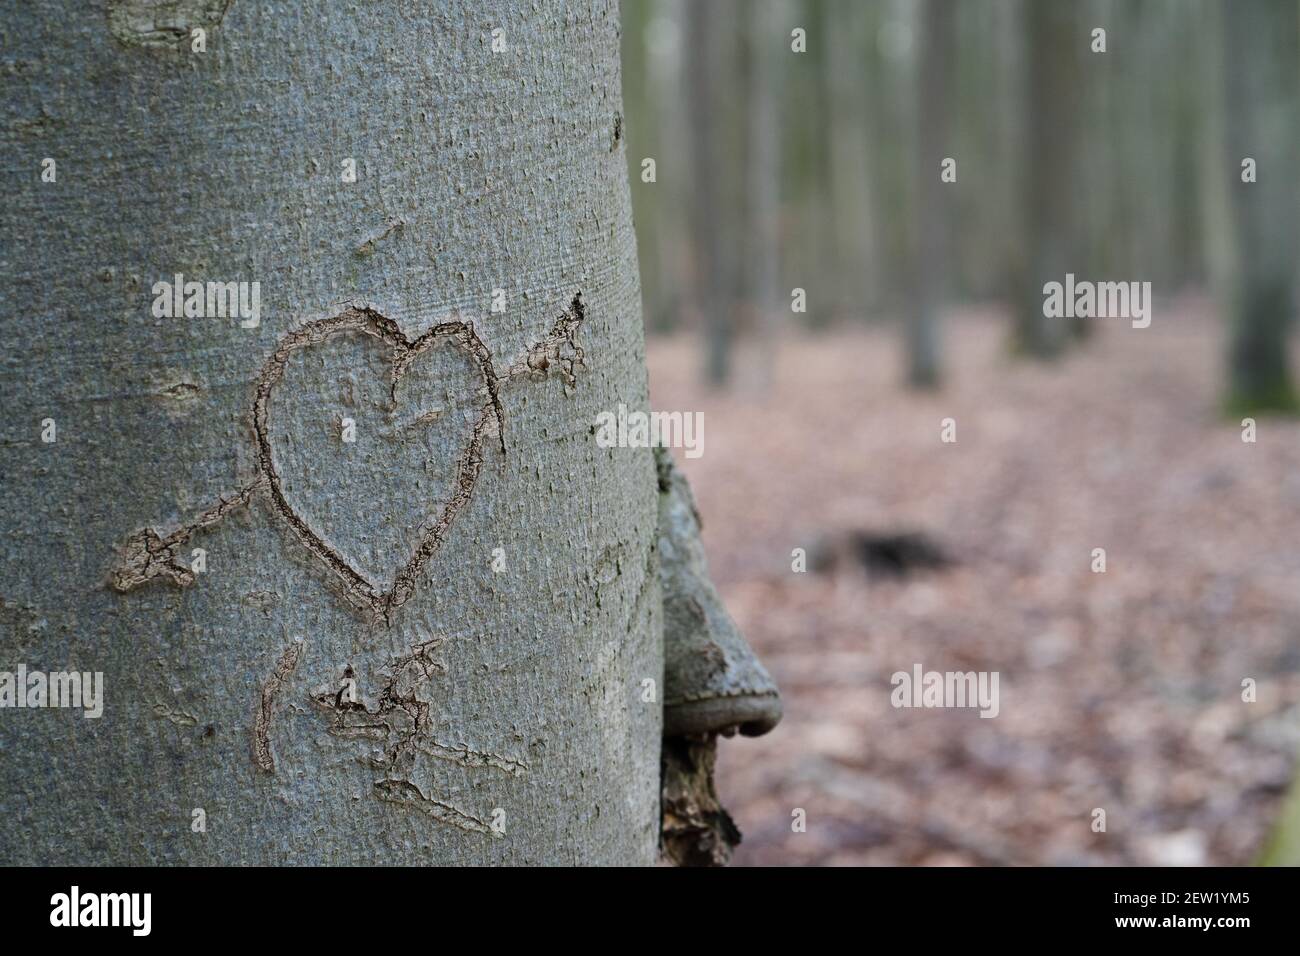 A broken heart carved on a tree trunk Stock Photo